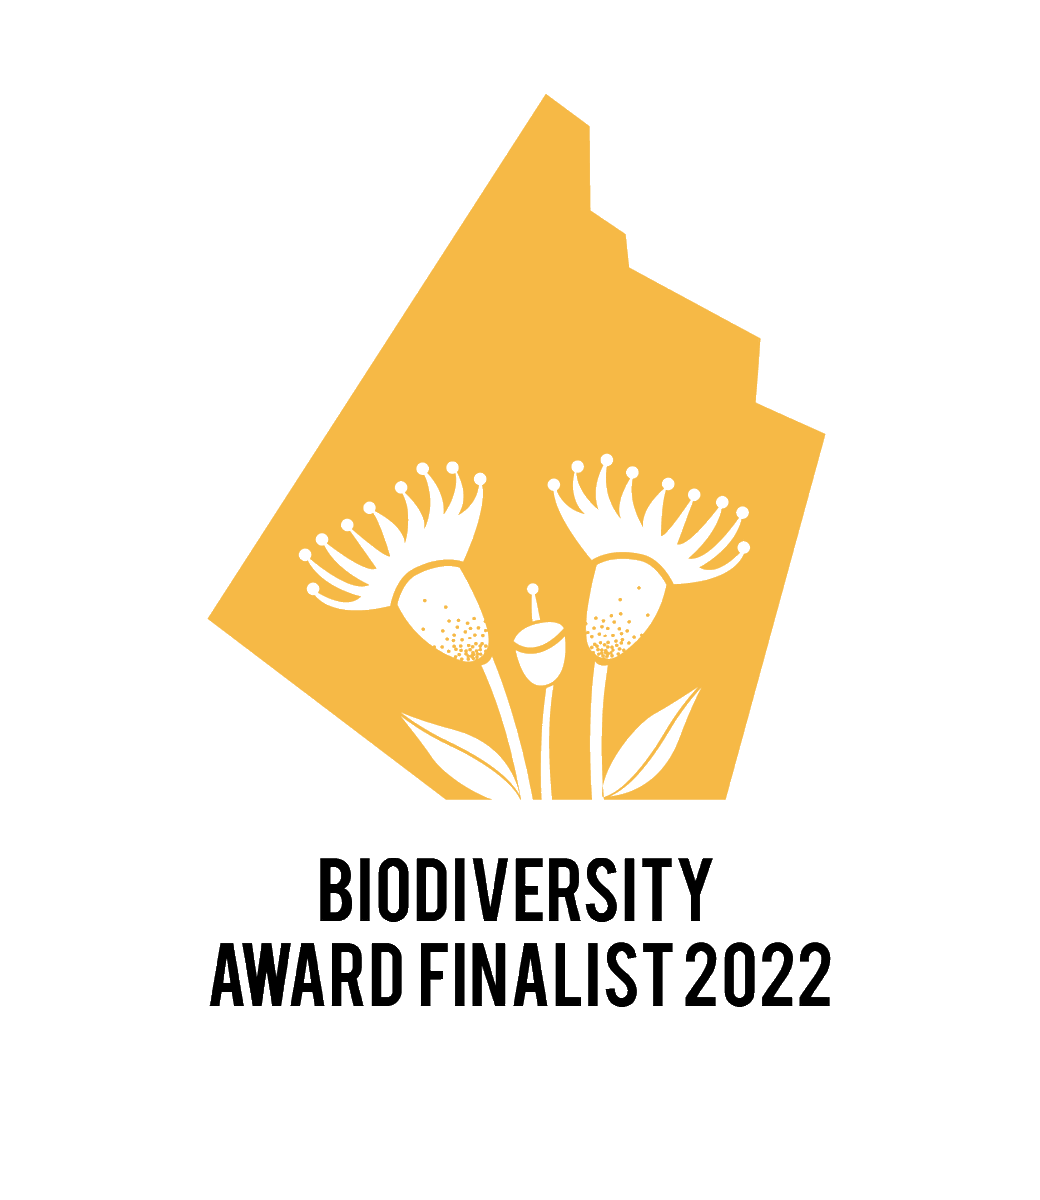 We are excited to share the news that we are a finalist in the 33rd Banksia National Sustainability Awards for Biodiversity - Australia's most prestigious #sustainability awards! Thank you @BanksiaFdn for your support! banksiafdn.com/national-award…